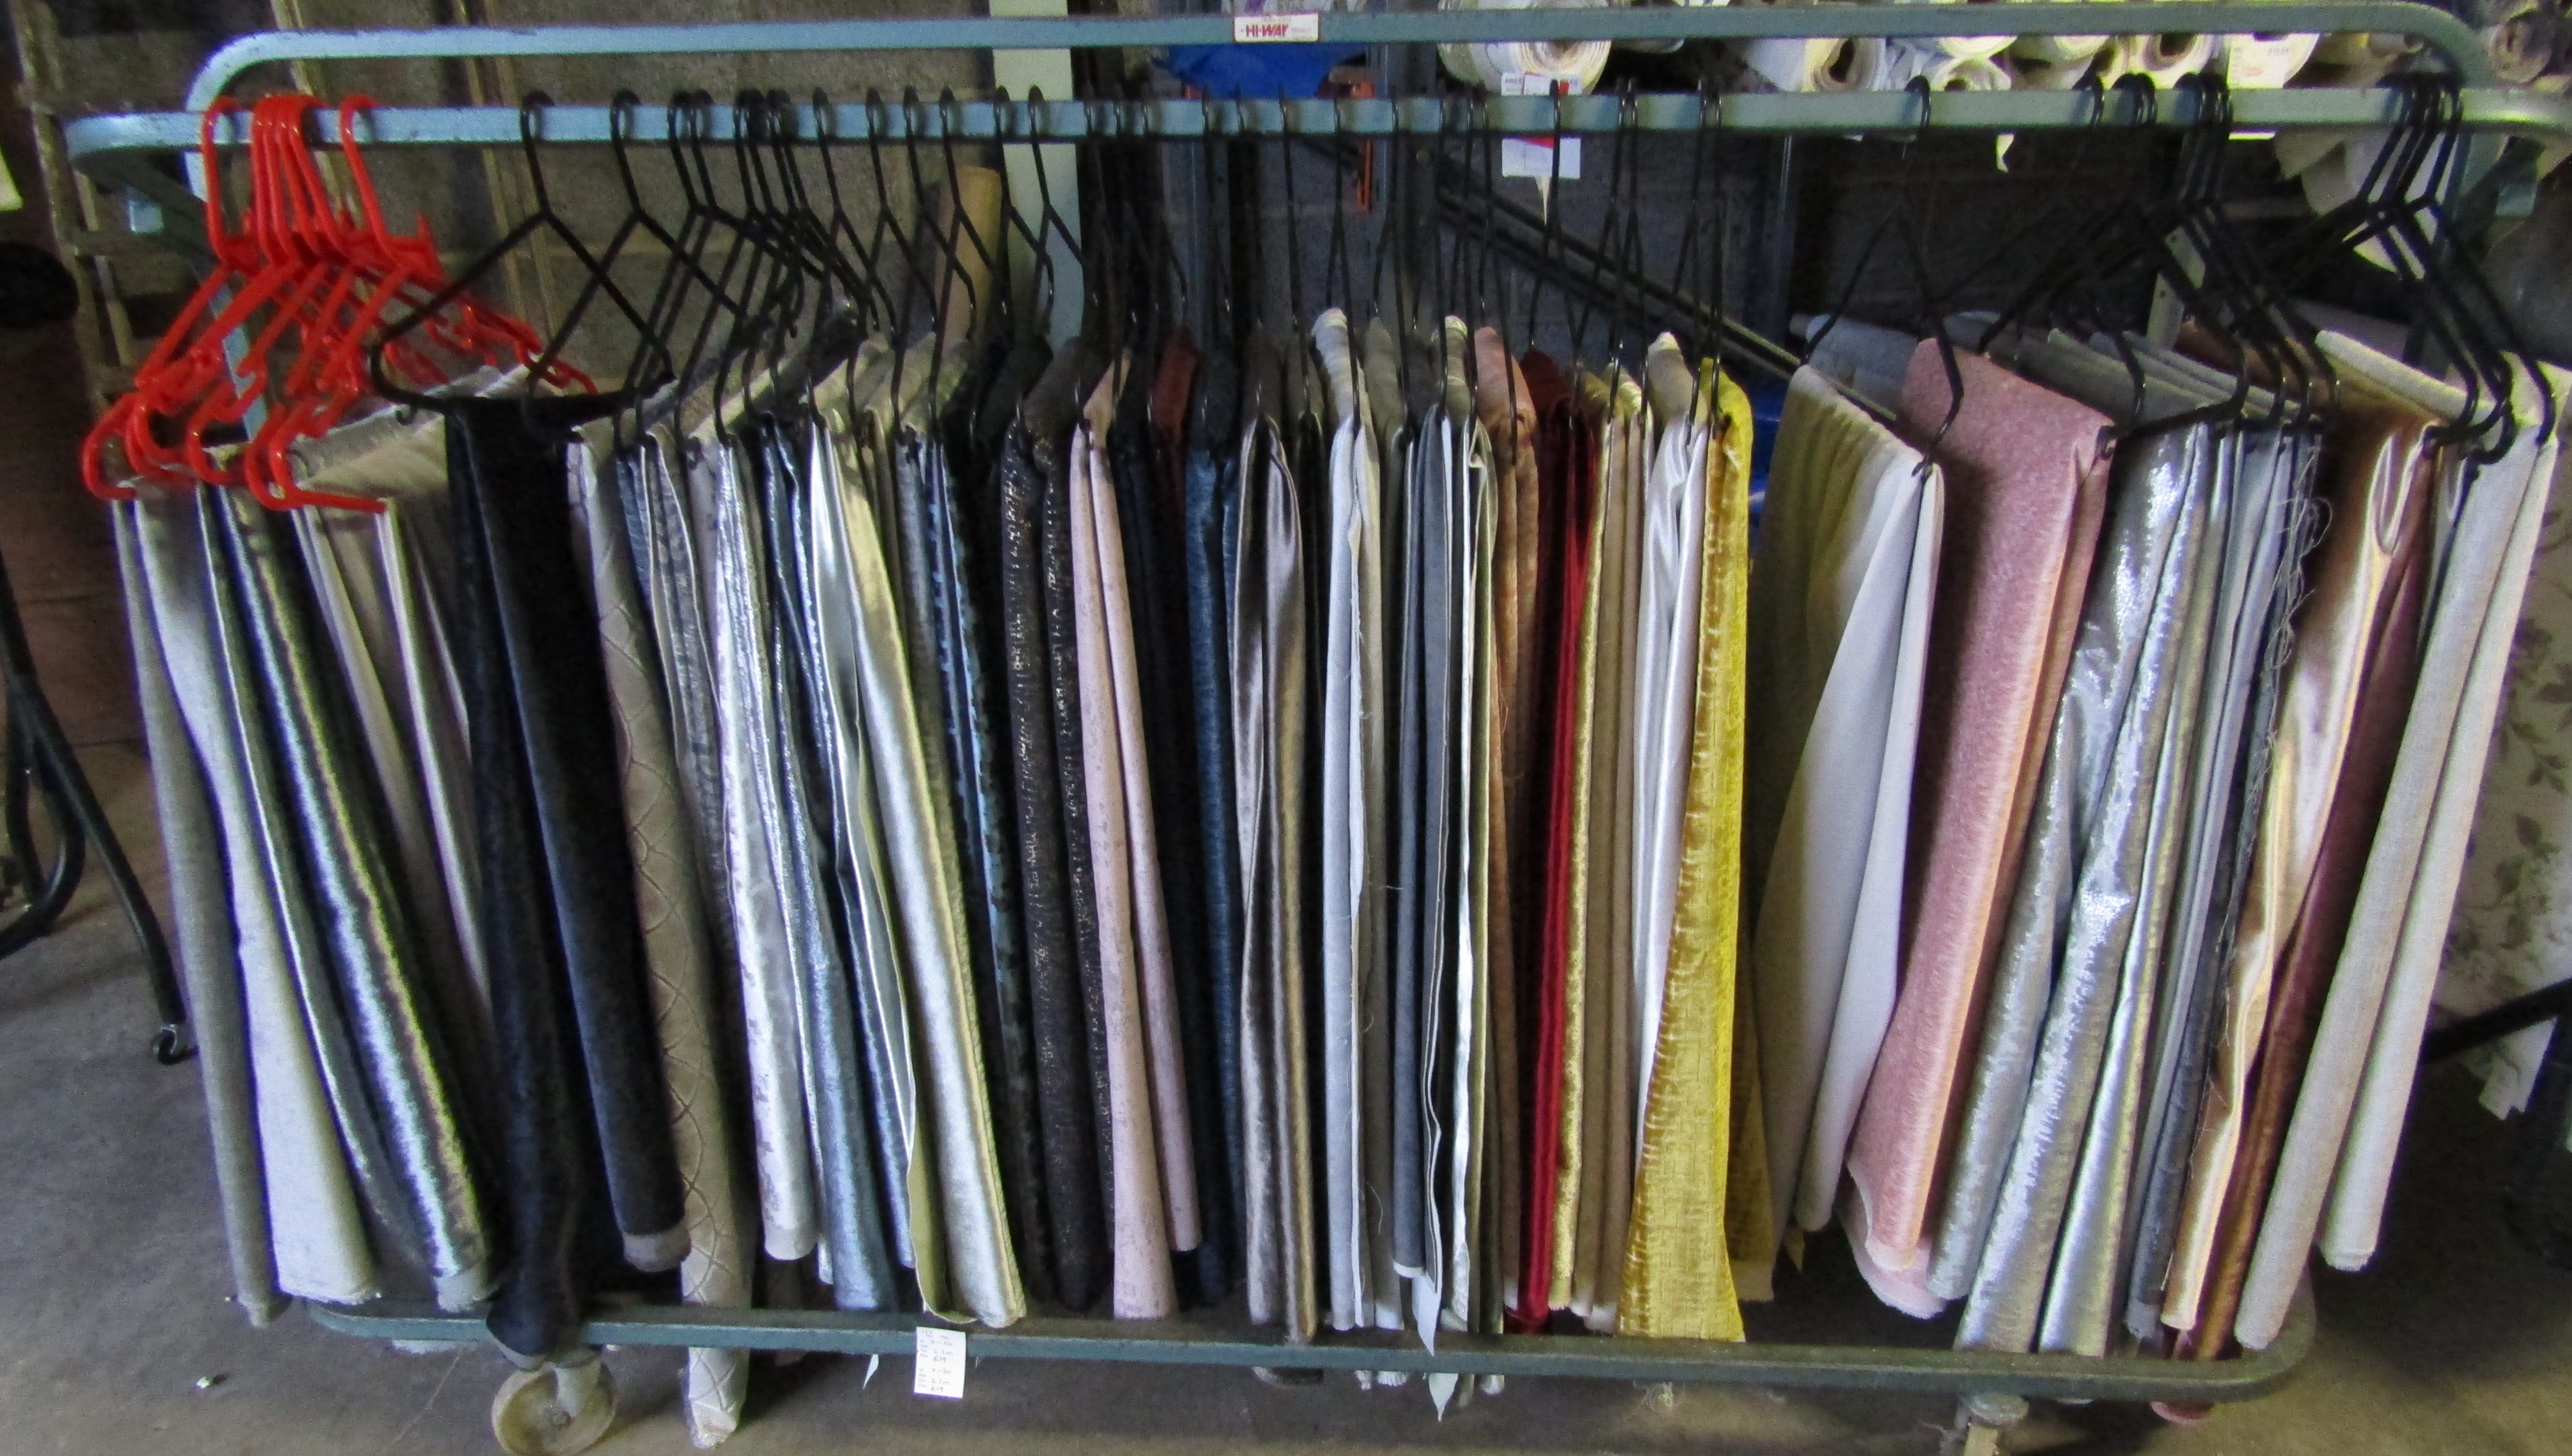 Rail of mainly velvet fabrics mostly Ashley Wilds - each piece between 1-3metres (RAIL NOT